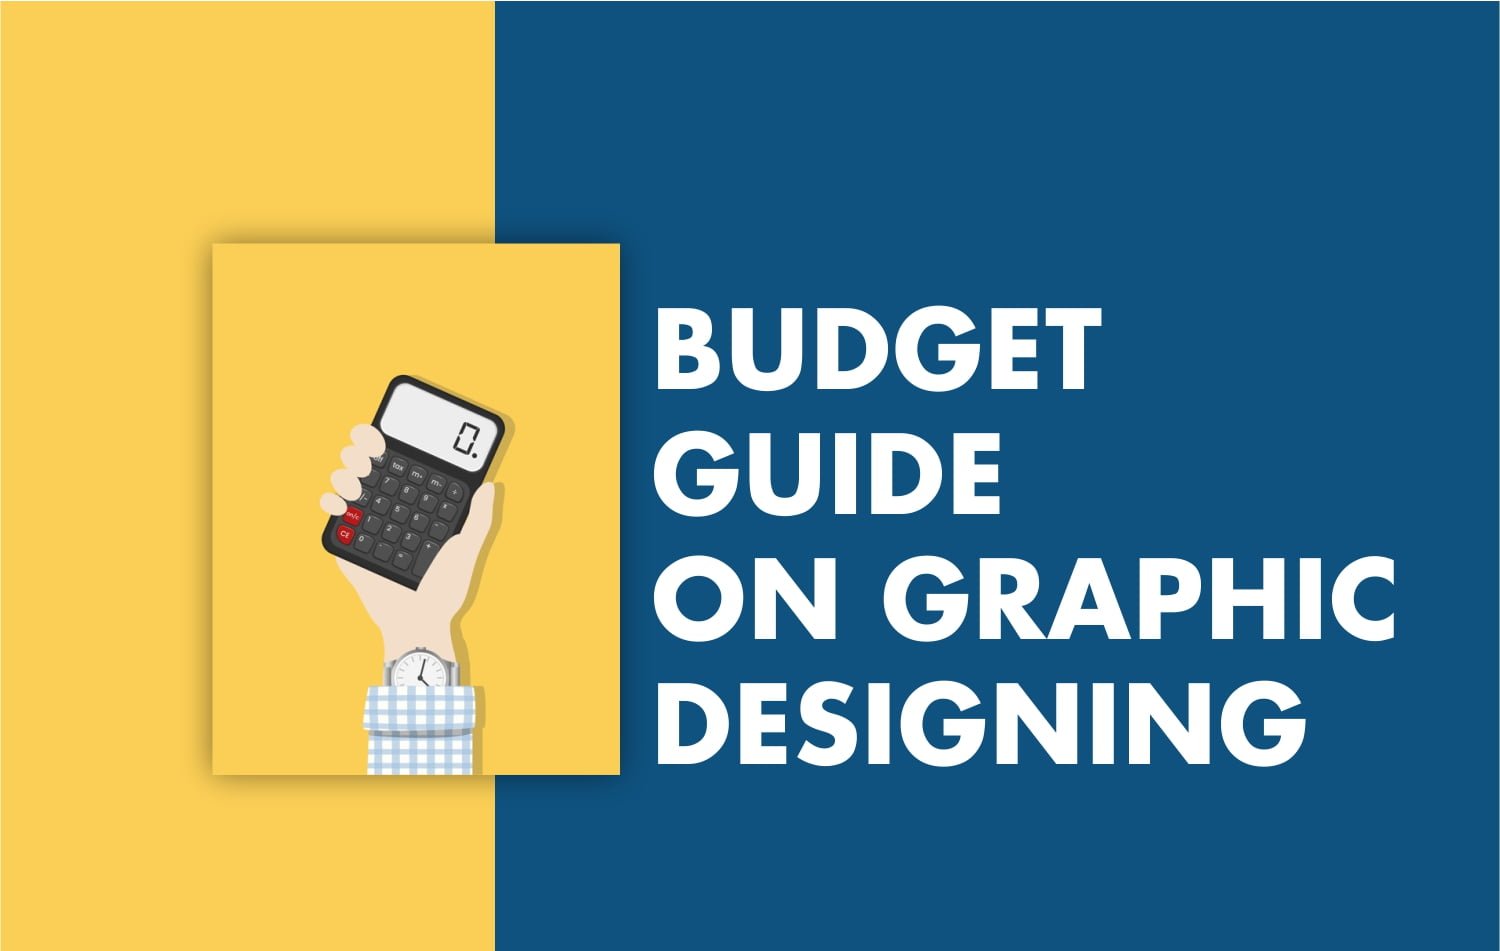 Budget Guide on Graphic Designing